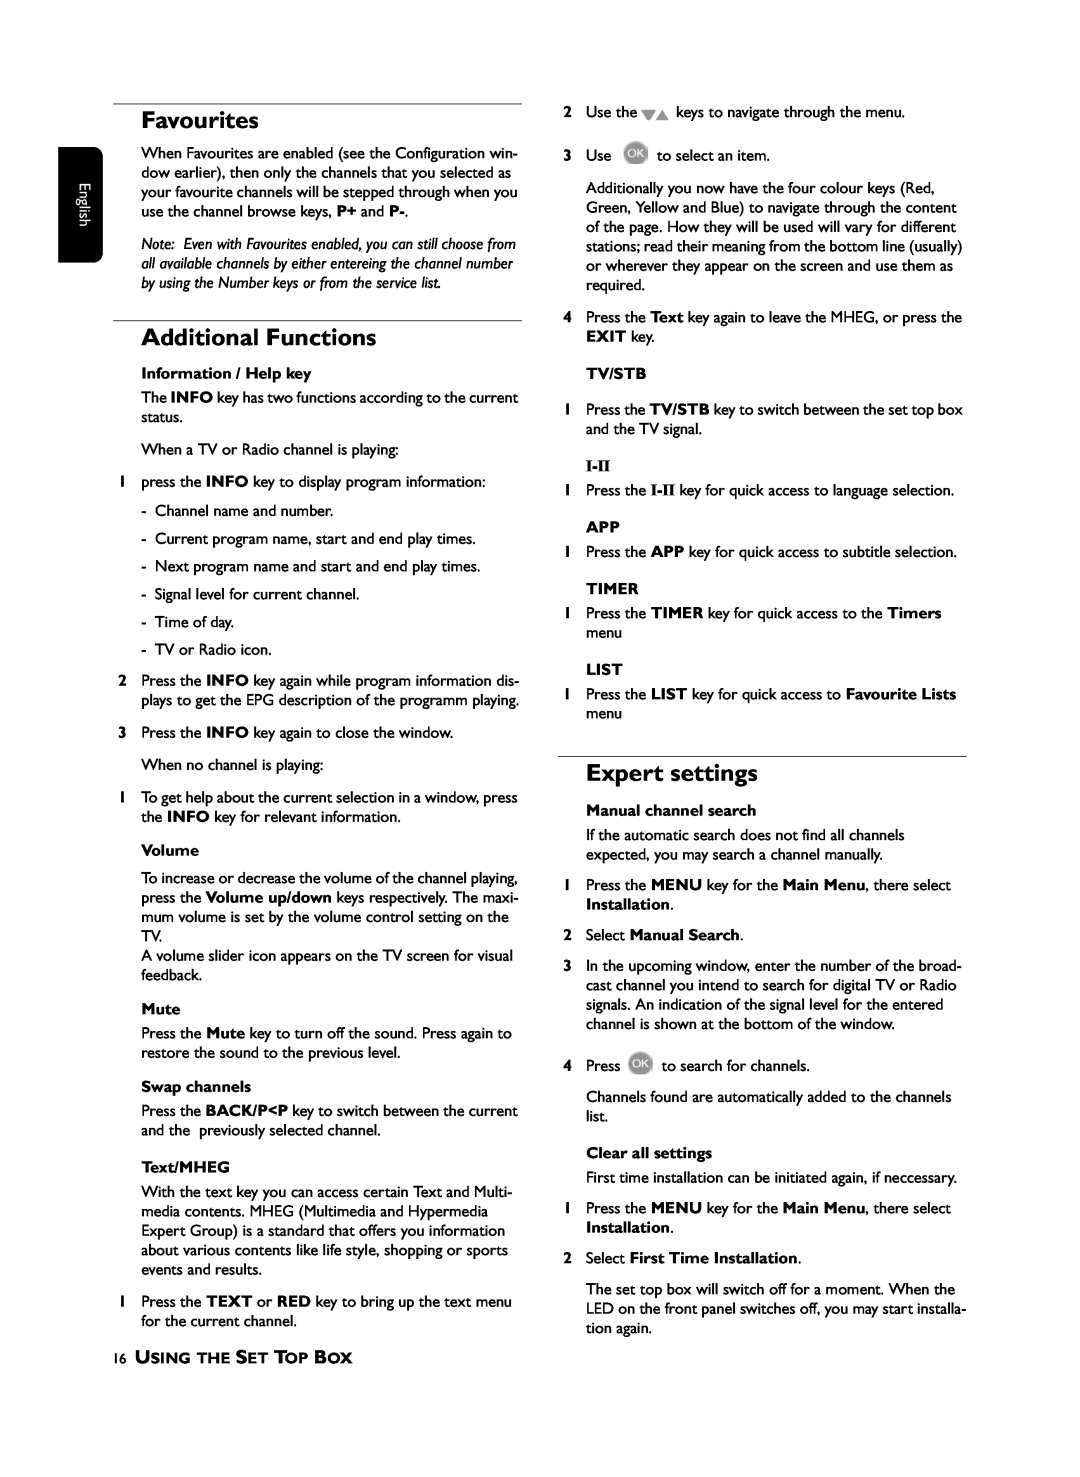 Philips DTR210 user manual Favourites, Additional Functions, Expert settings 